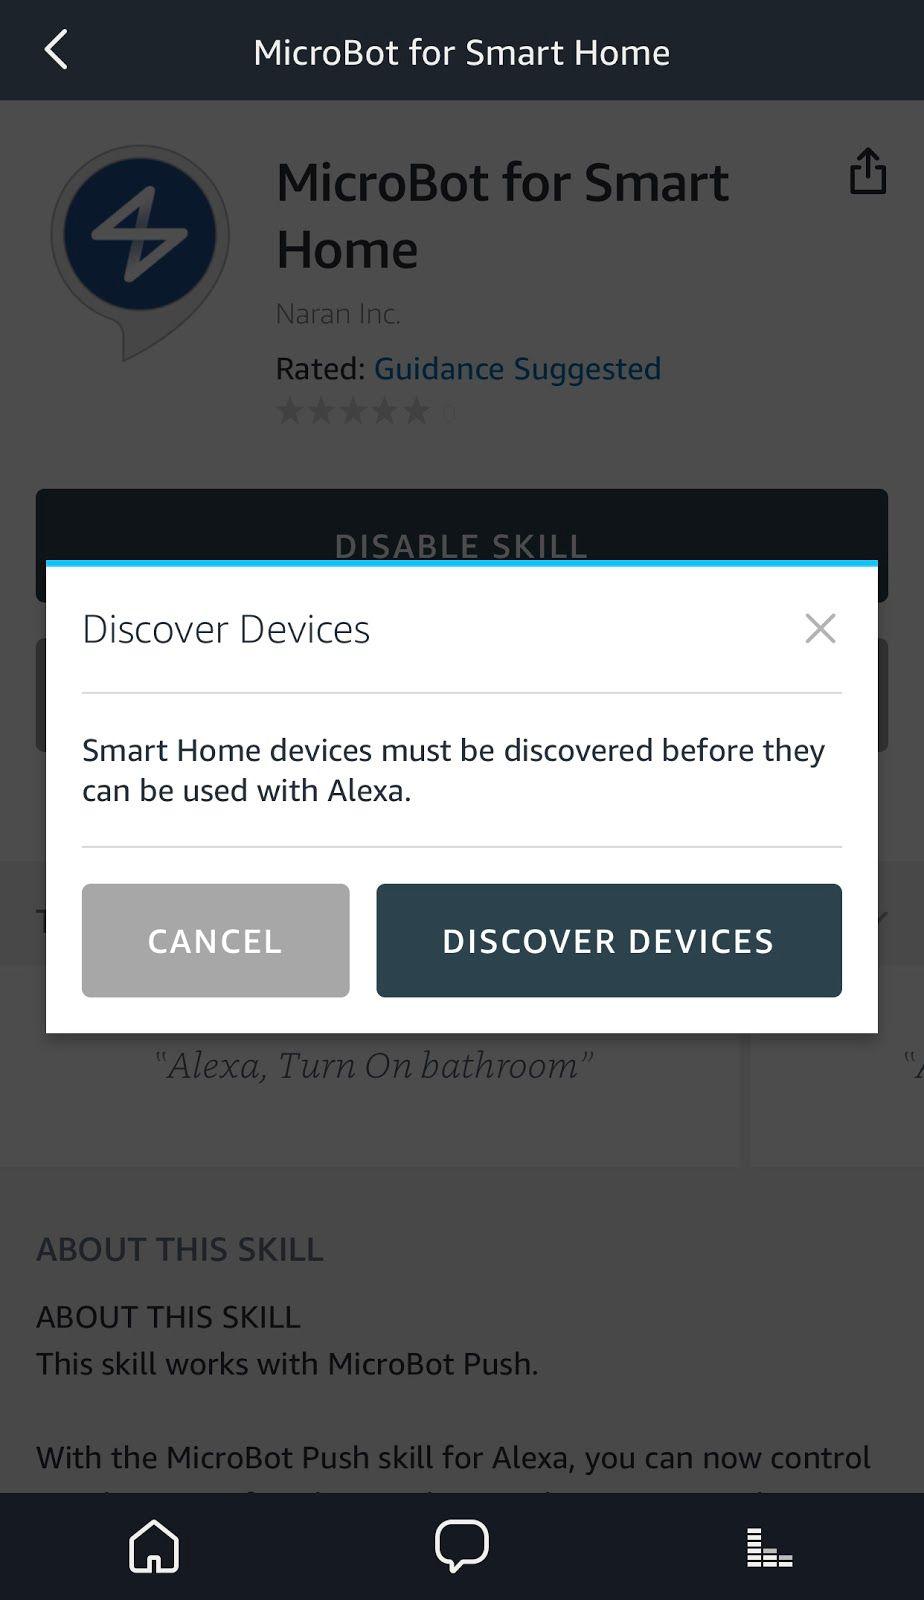 Once you've enabled the 'MicroBot for Smart Home' skill, tap on 'DISCOVER DEVICES' on the pop-up